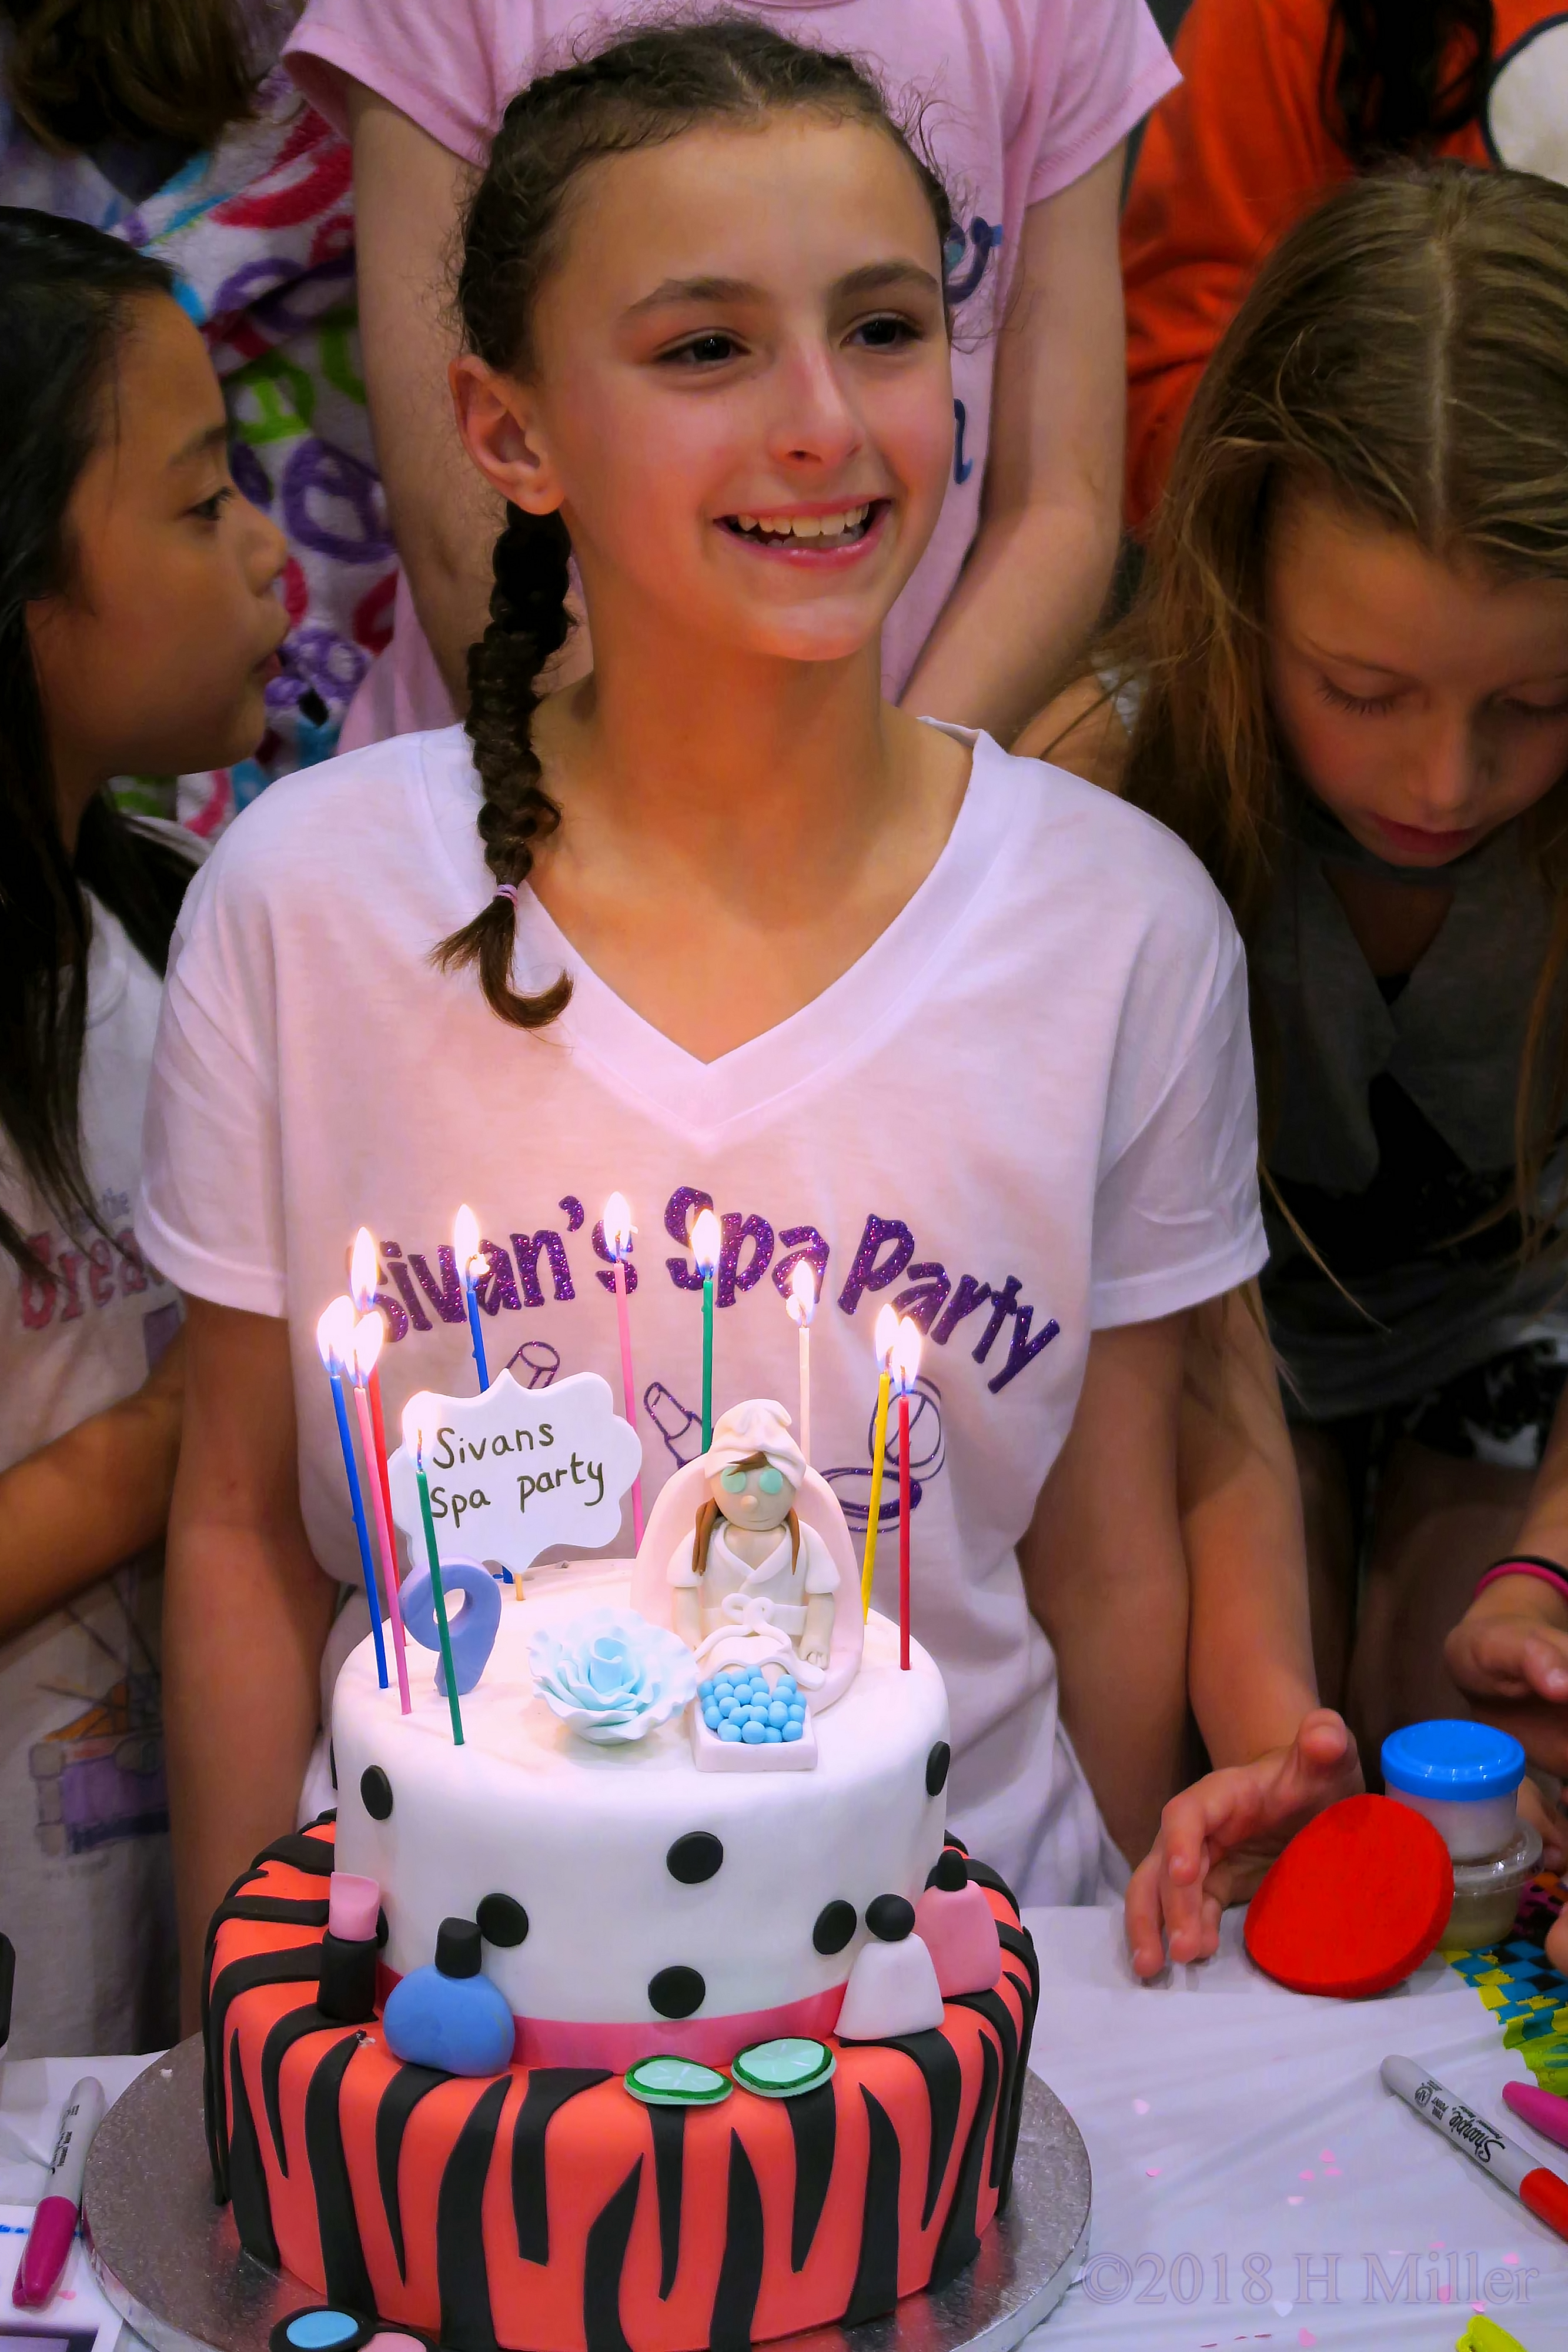 Close Up Of The Birthday Girl And Her Cake 4